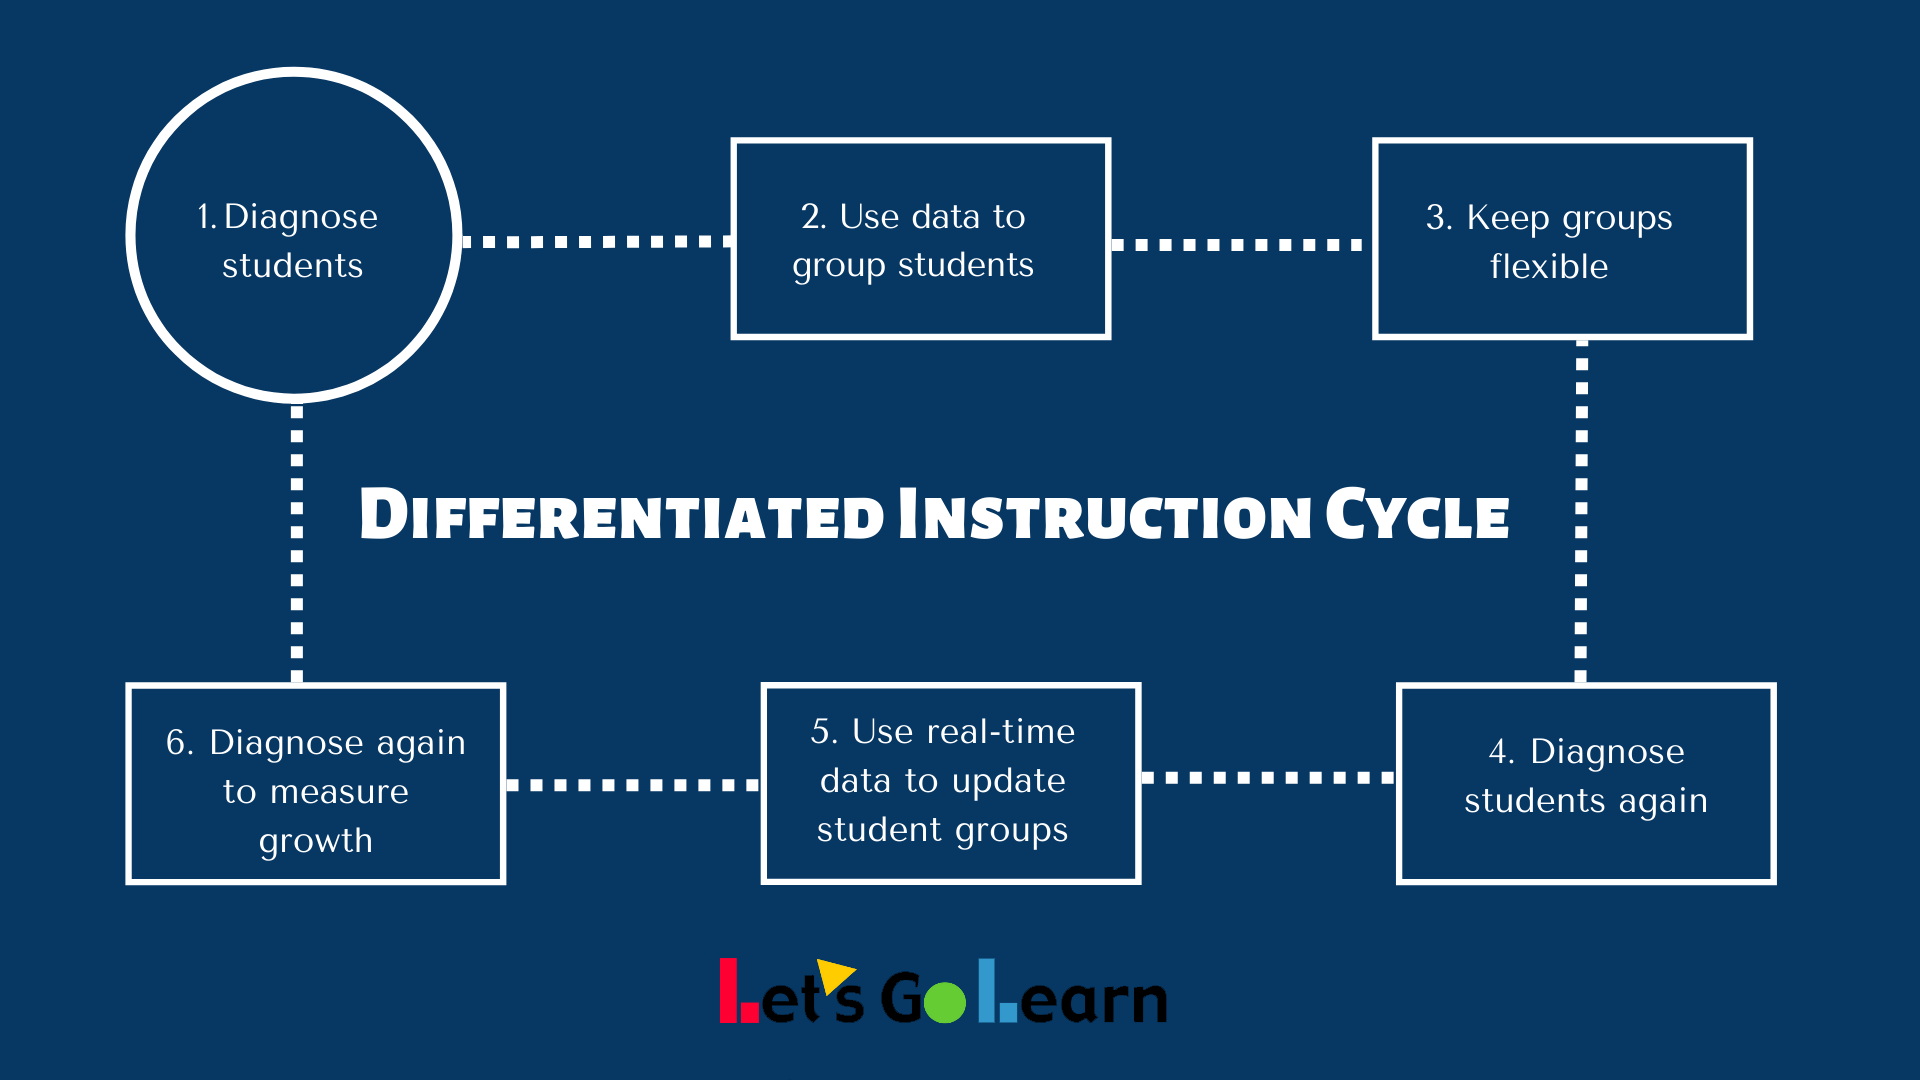 differentiated instruction quizlet